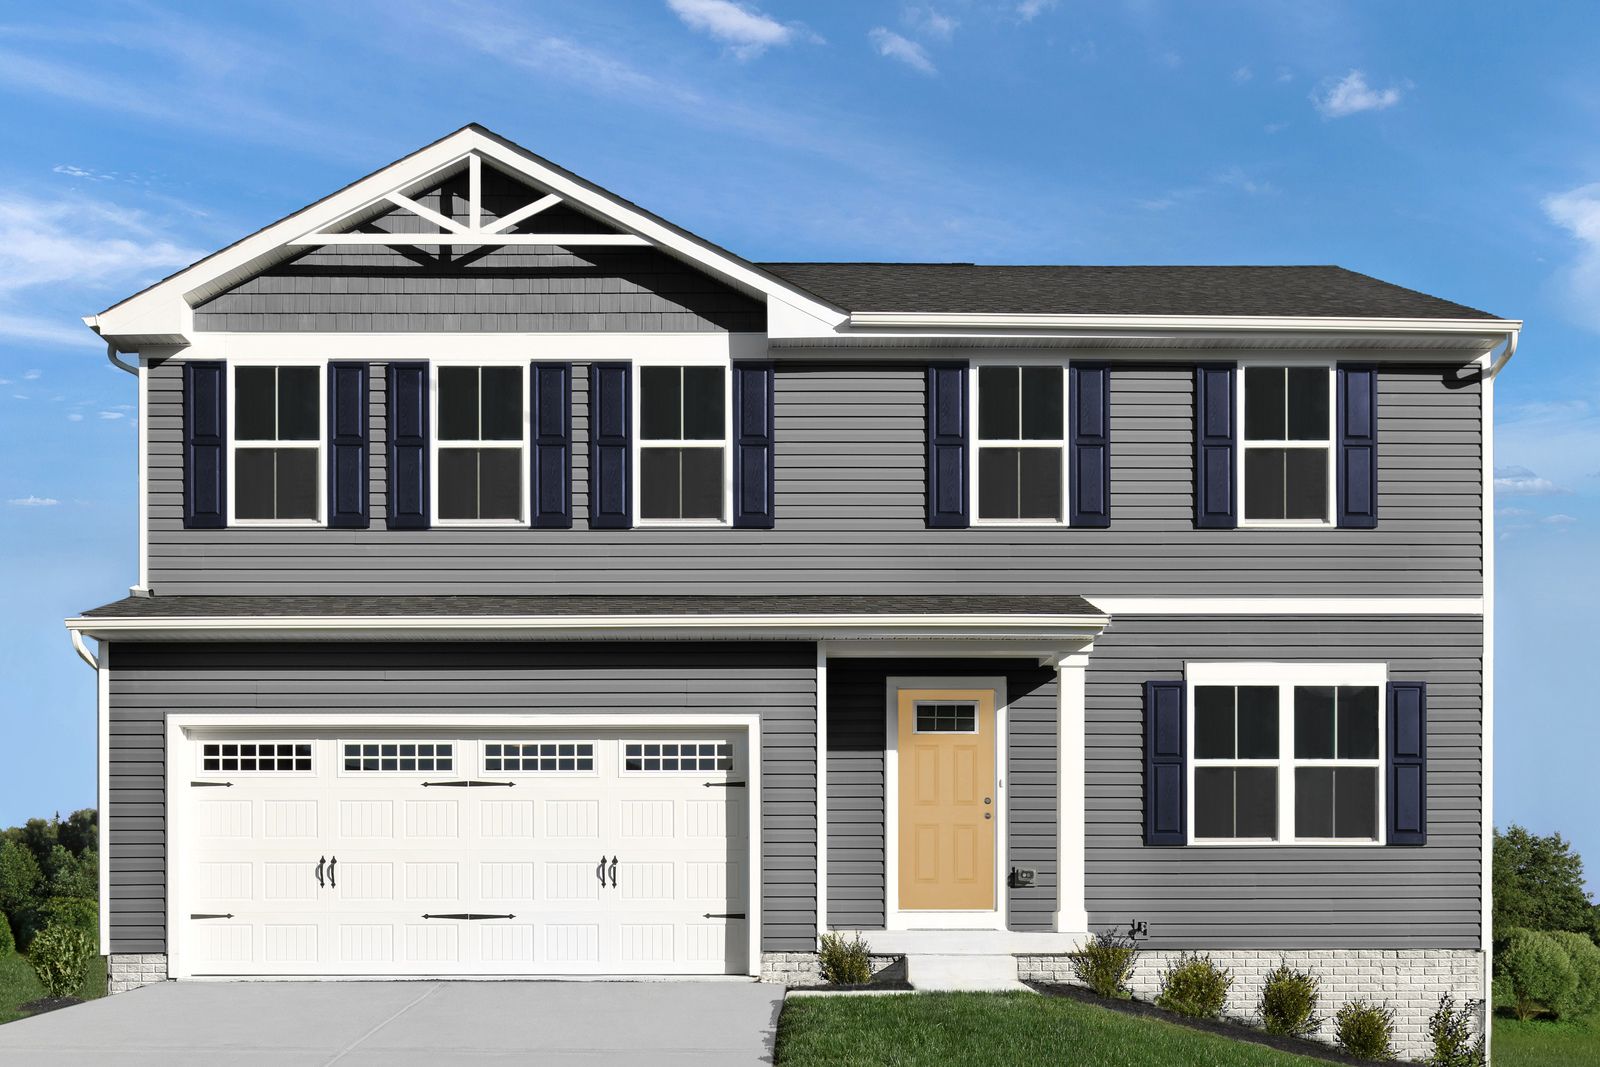 ARE YOU READY TO CALL HIDDEN LAKES 2-STORY HOME?:Lowest-priced new homes in Lakemore. Community pavilion, playground, &amp; dog park. Appliances included-from upper $200s.Learn more today!